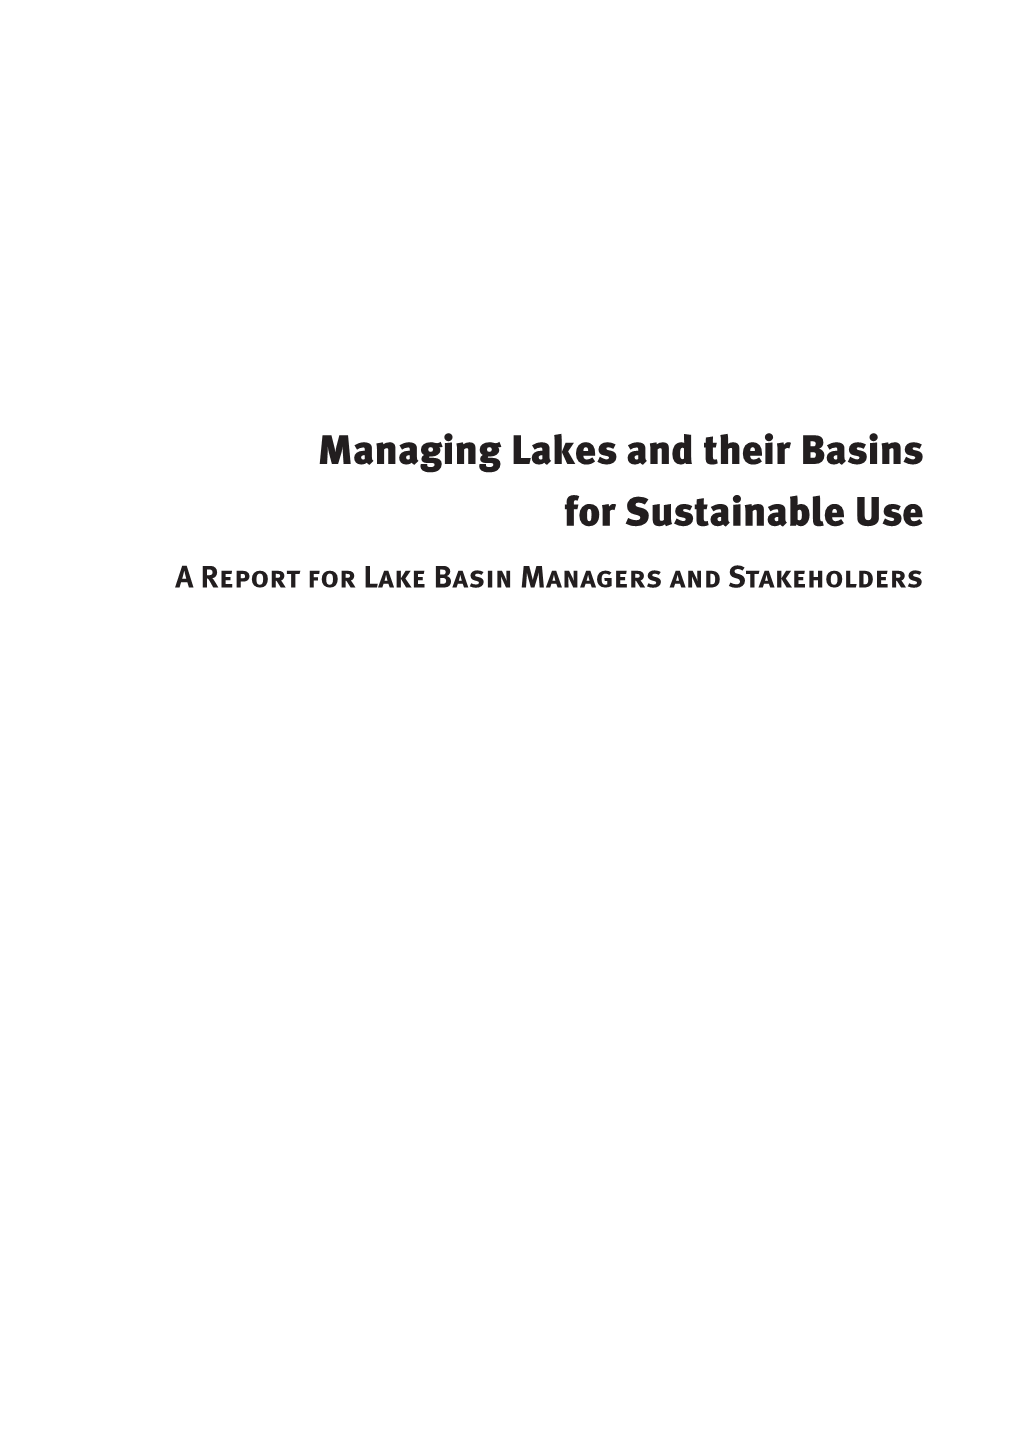 Managing Lakes and Their Basins for Sustainable